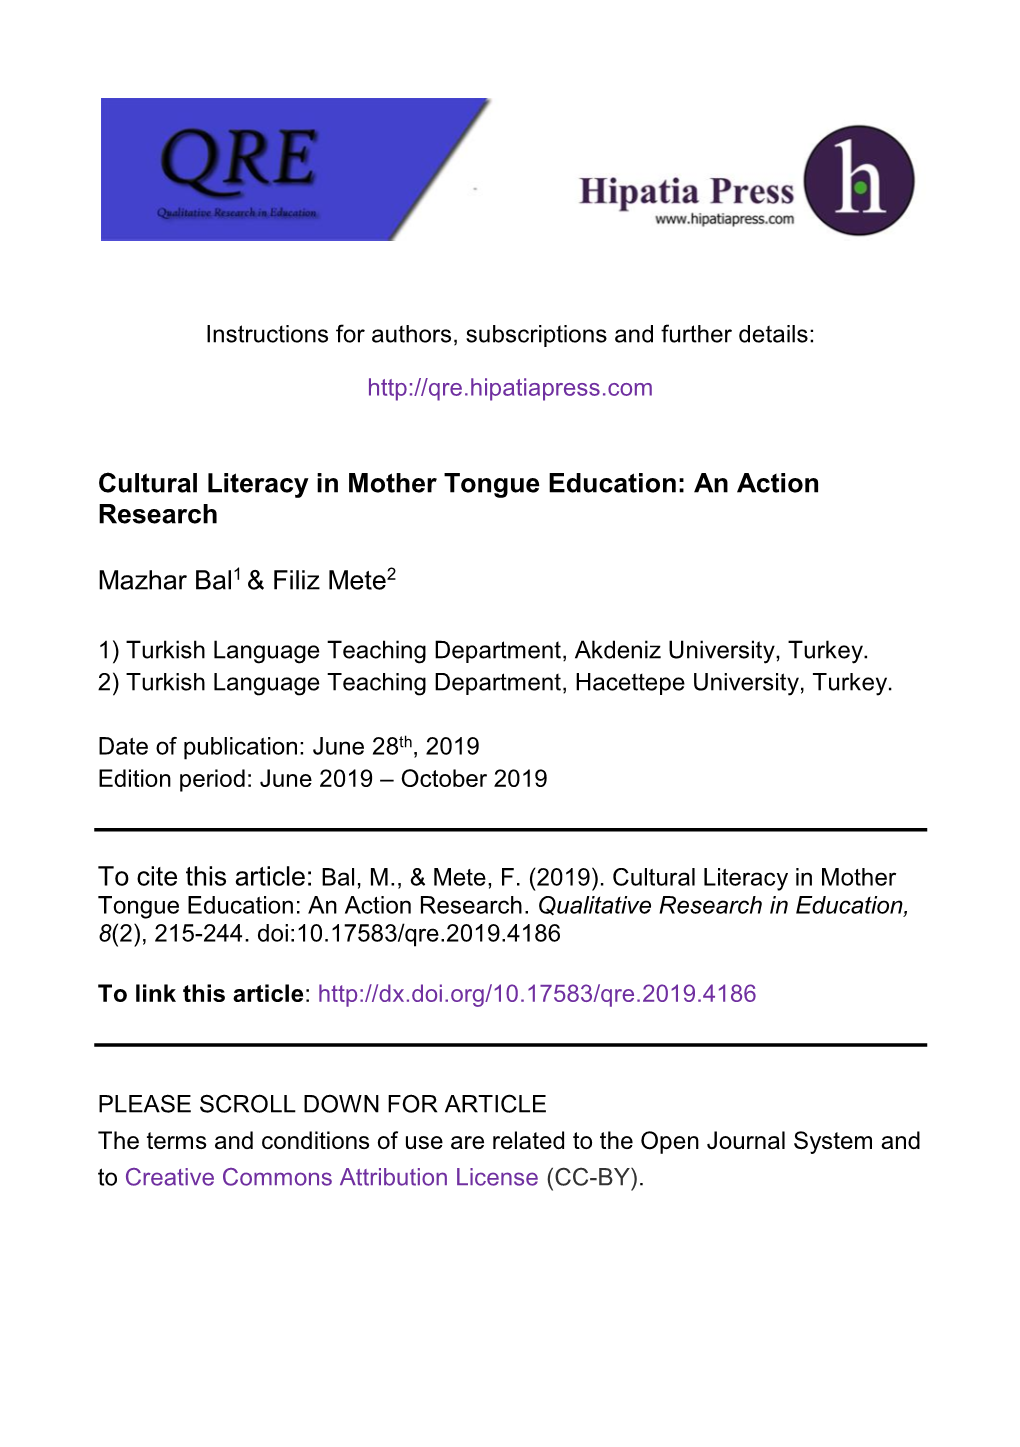 Cultural Literacy in Mother Tongue Education: an Action Research